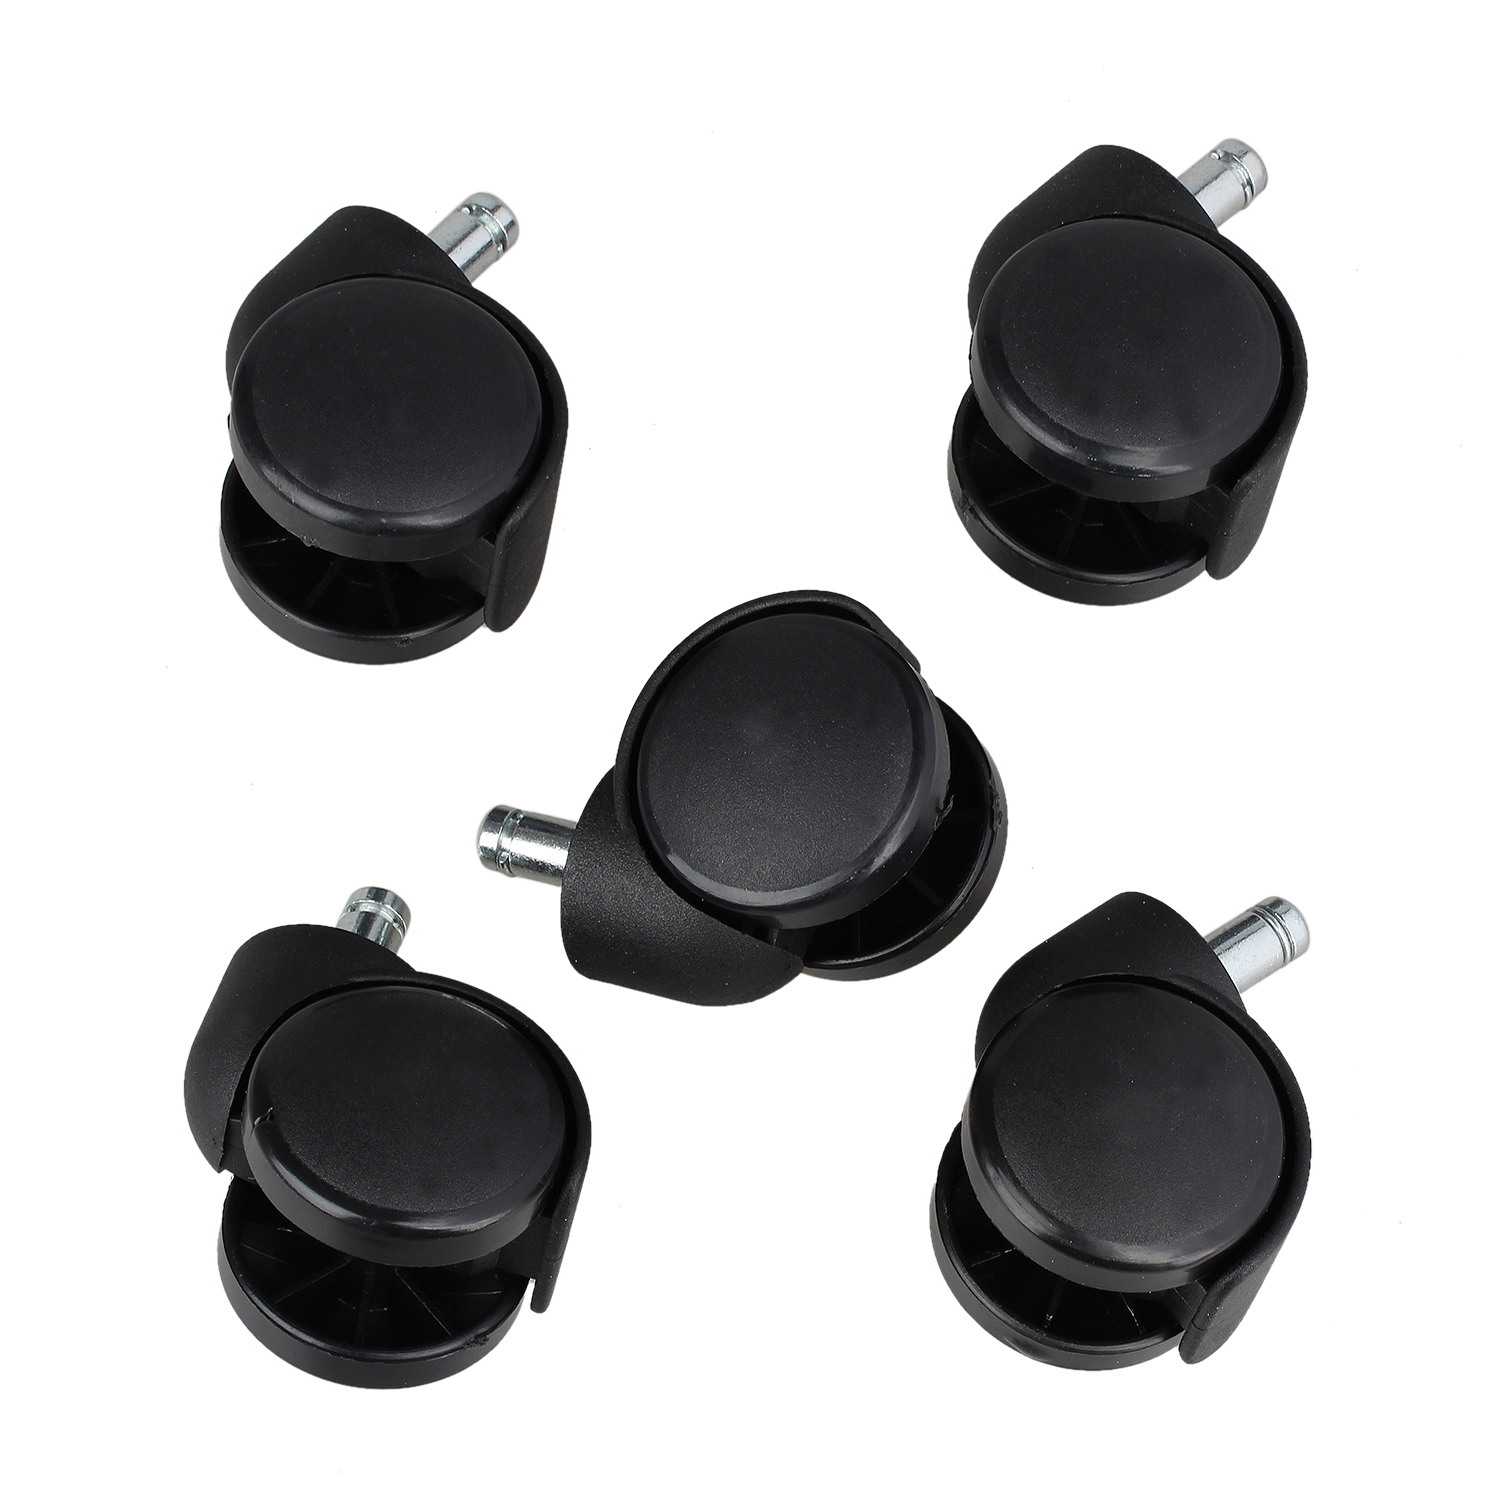 New Style 5 x Replacement Office Computer Chair Stem Swivel Castors Casters Wheels Black